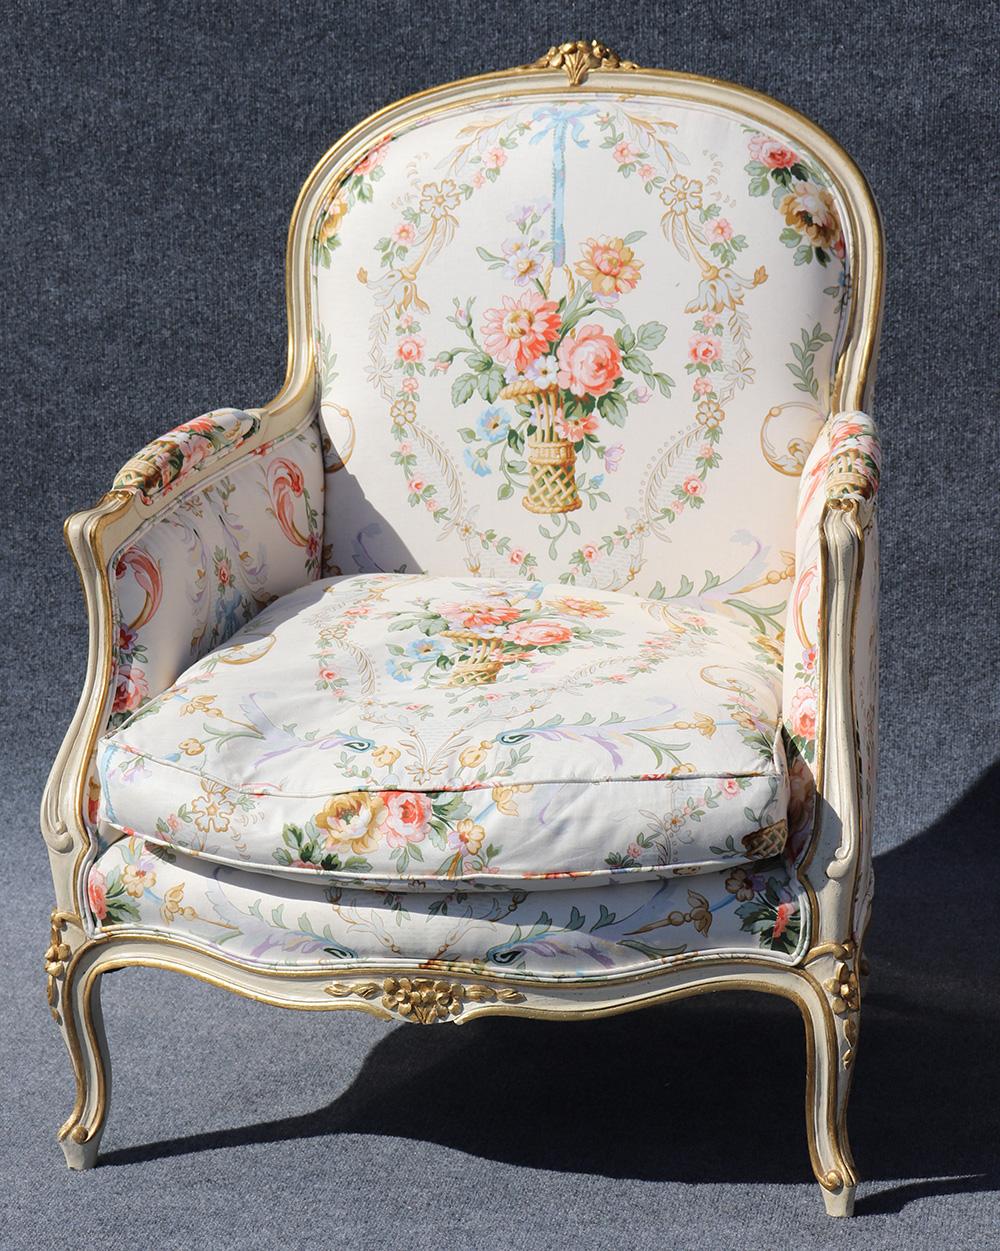 Pair of French distressed painted bergère chairs with goose down filled cushions and gold leaf accents.